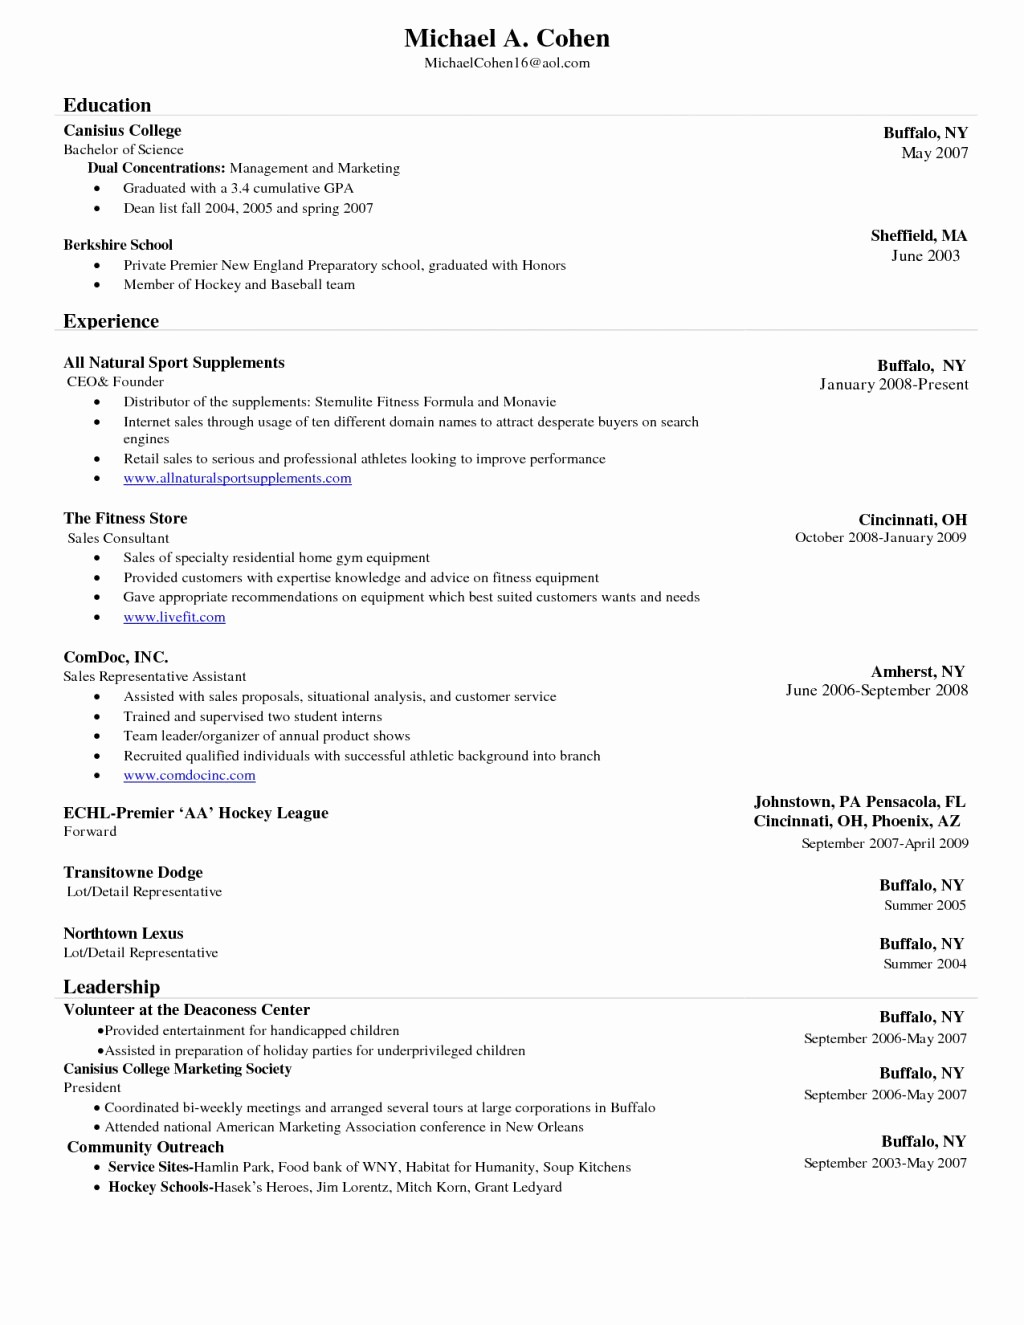 What Microsoft Program Makes Resumes Fresh Free Template for Resume In Microsoft Word Tag software